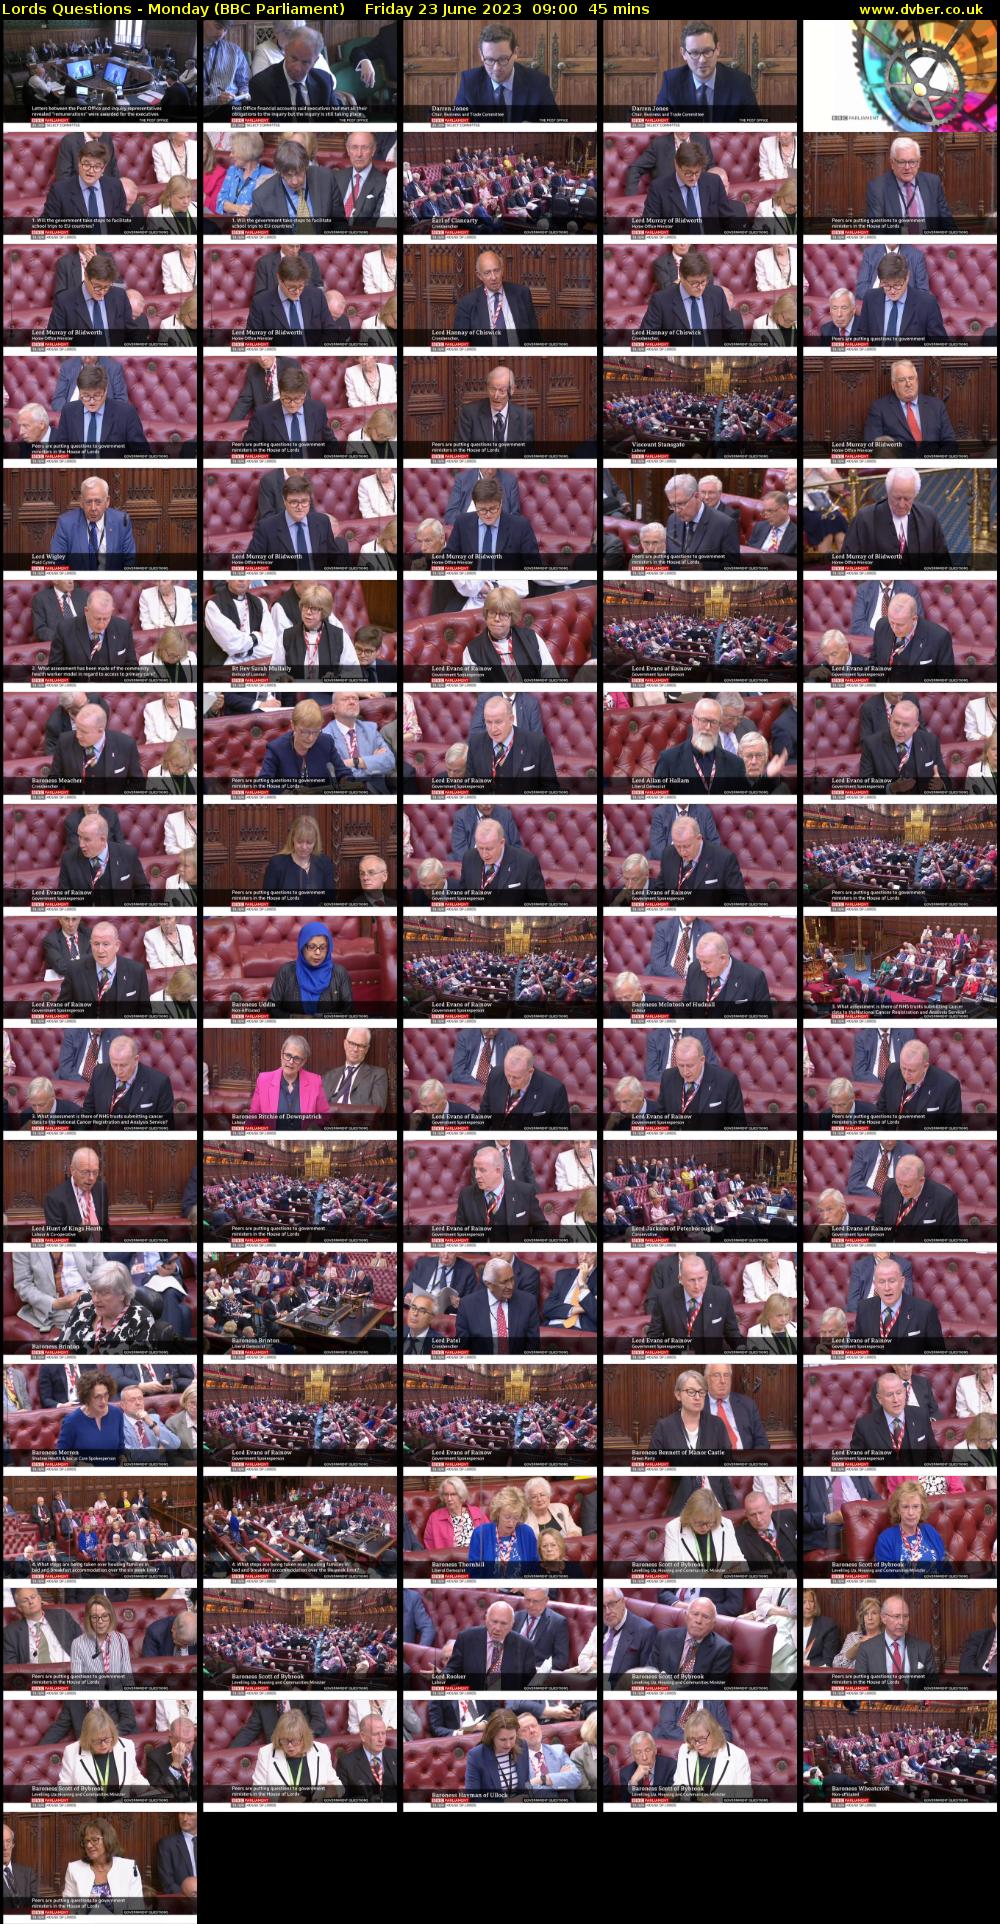 Lords Questions - Monday (BBC Parliament) Friday 23 June 2023 09:00 - 09:45